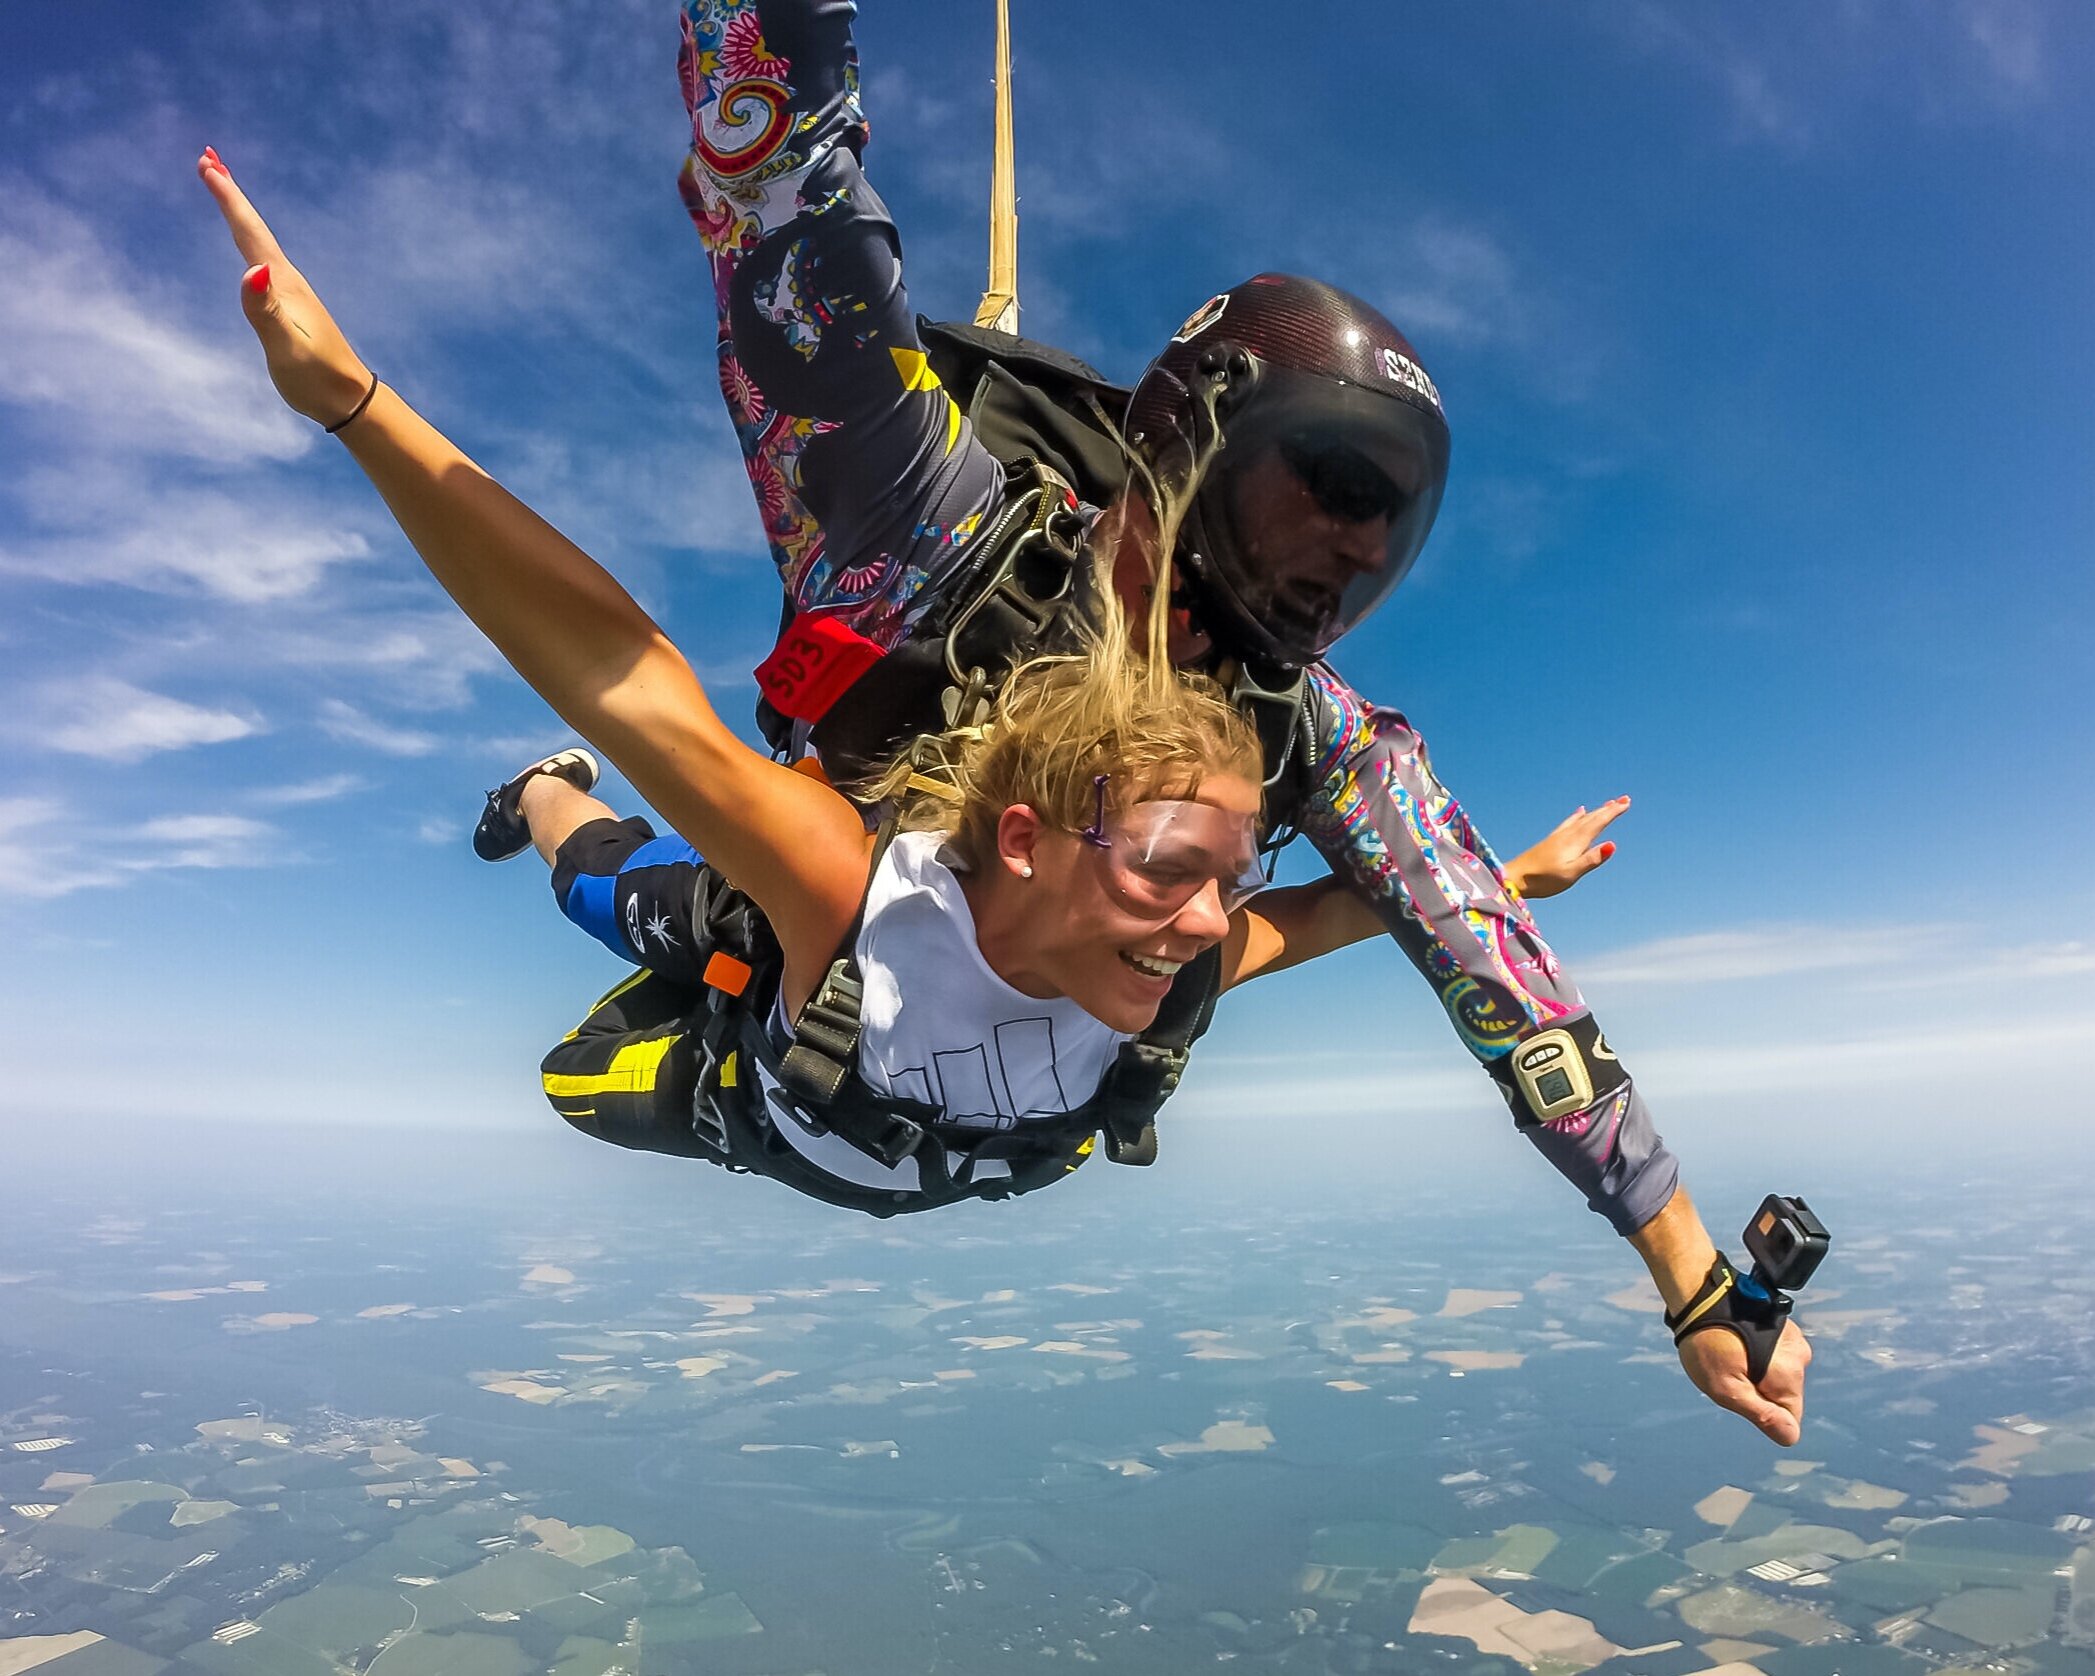 how-much-does-skydiving-cost-2018-prices-huckster-repellent